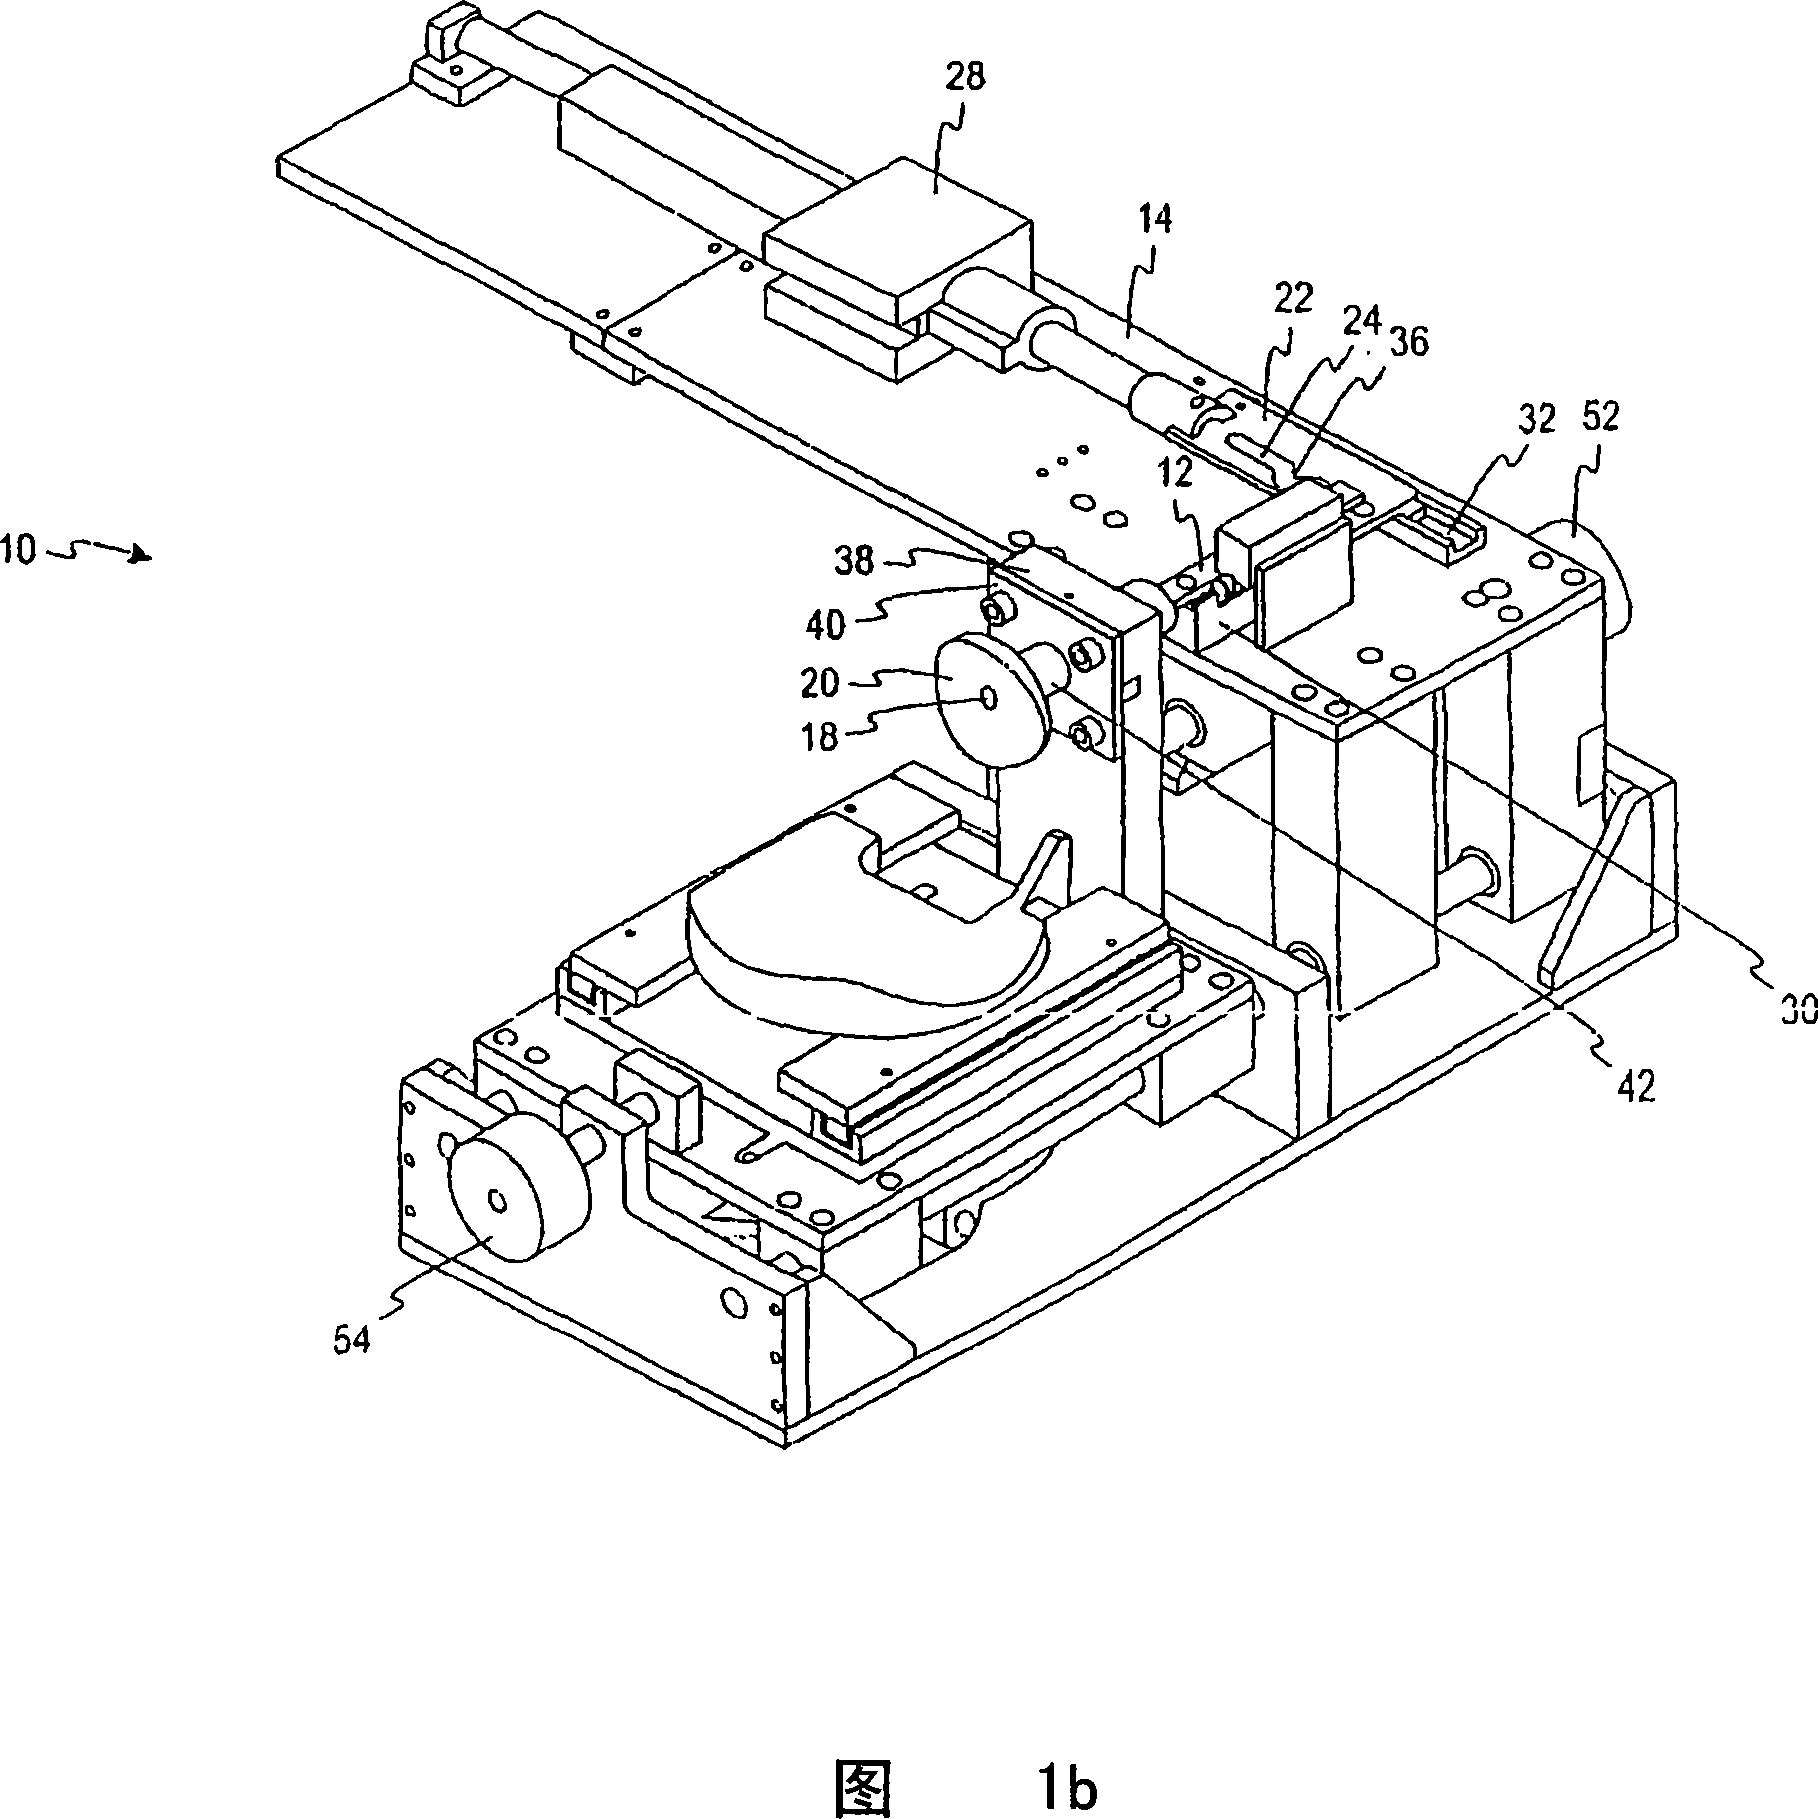 Single puncture lancing fixture with depth adjustment and control of contact force